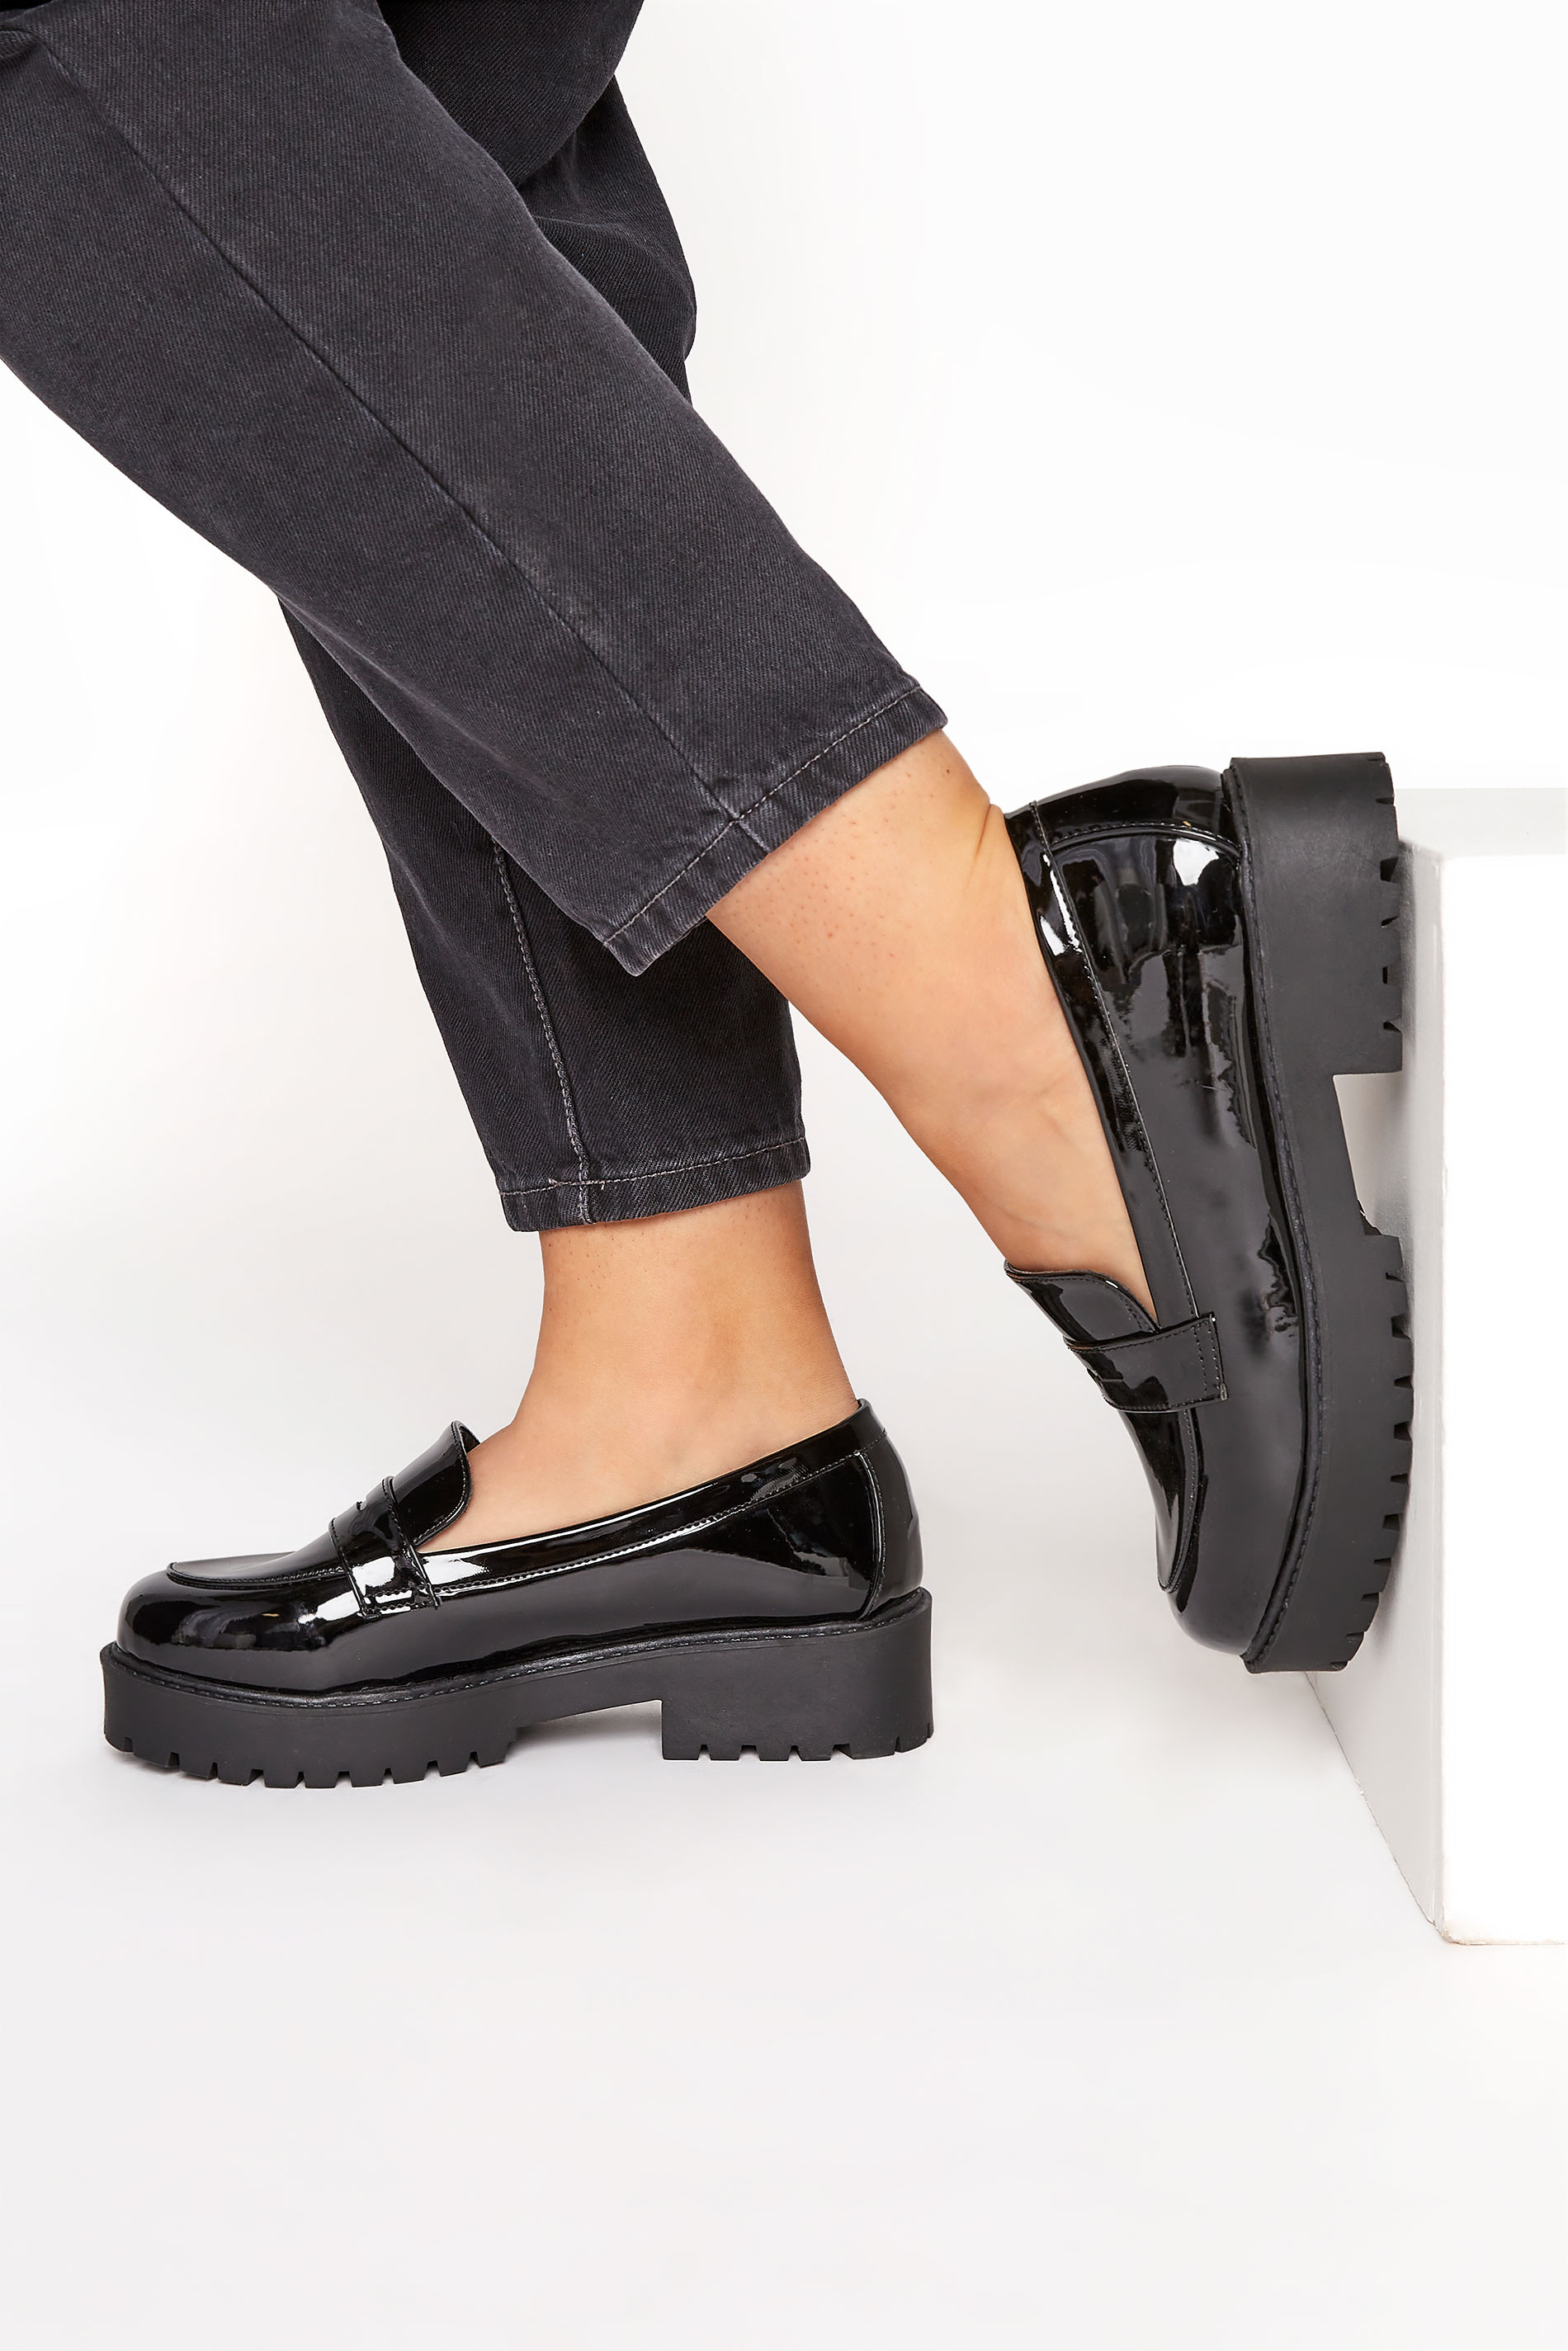 Plus Size Black Patent Chunky Loafers In Wide E Fit & Extra Wide EEE Fit | Yours Clothing 1